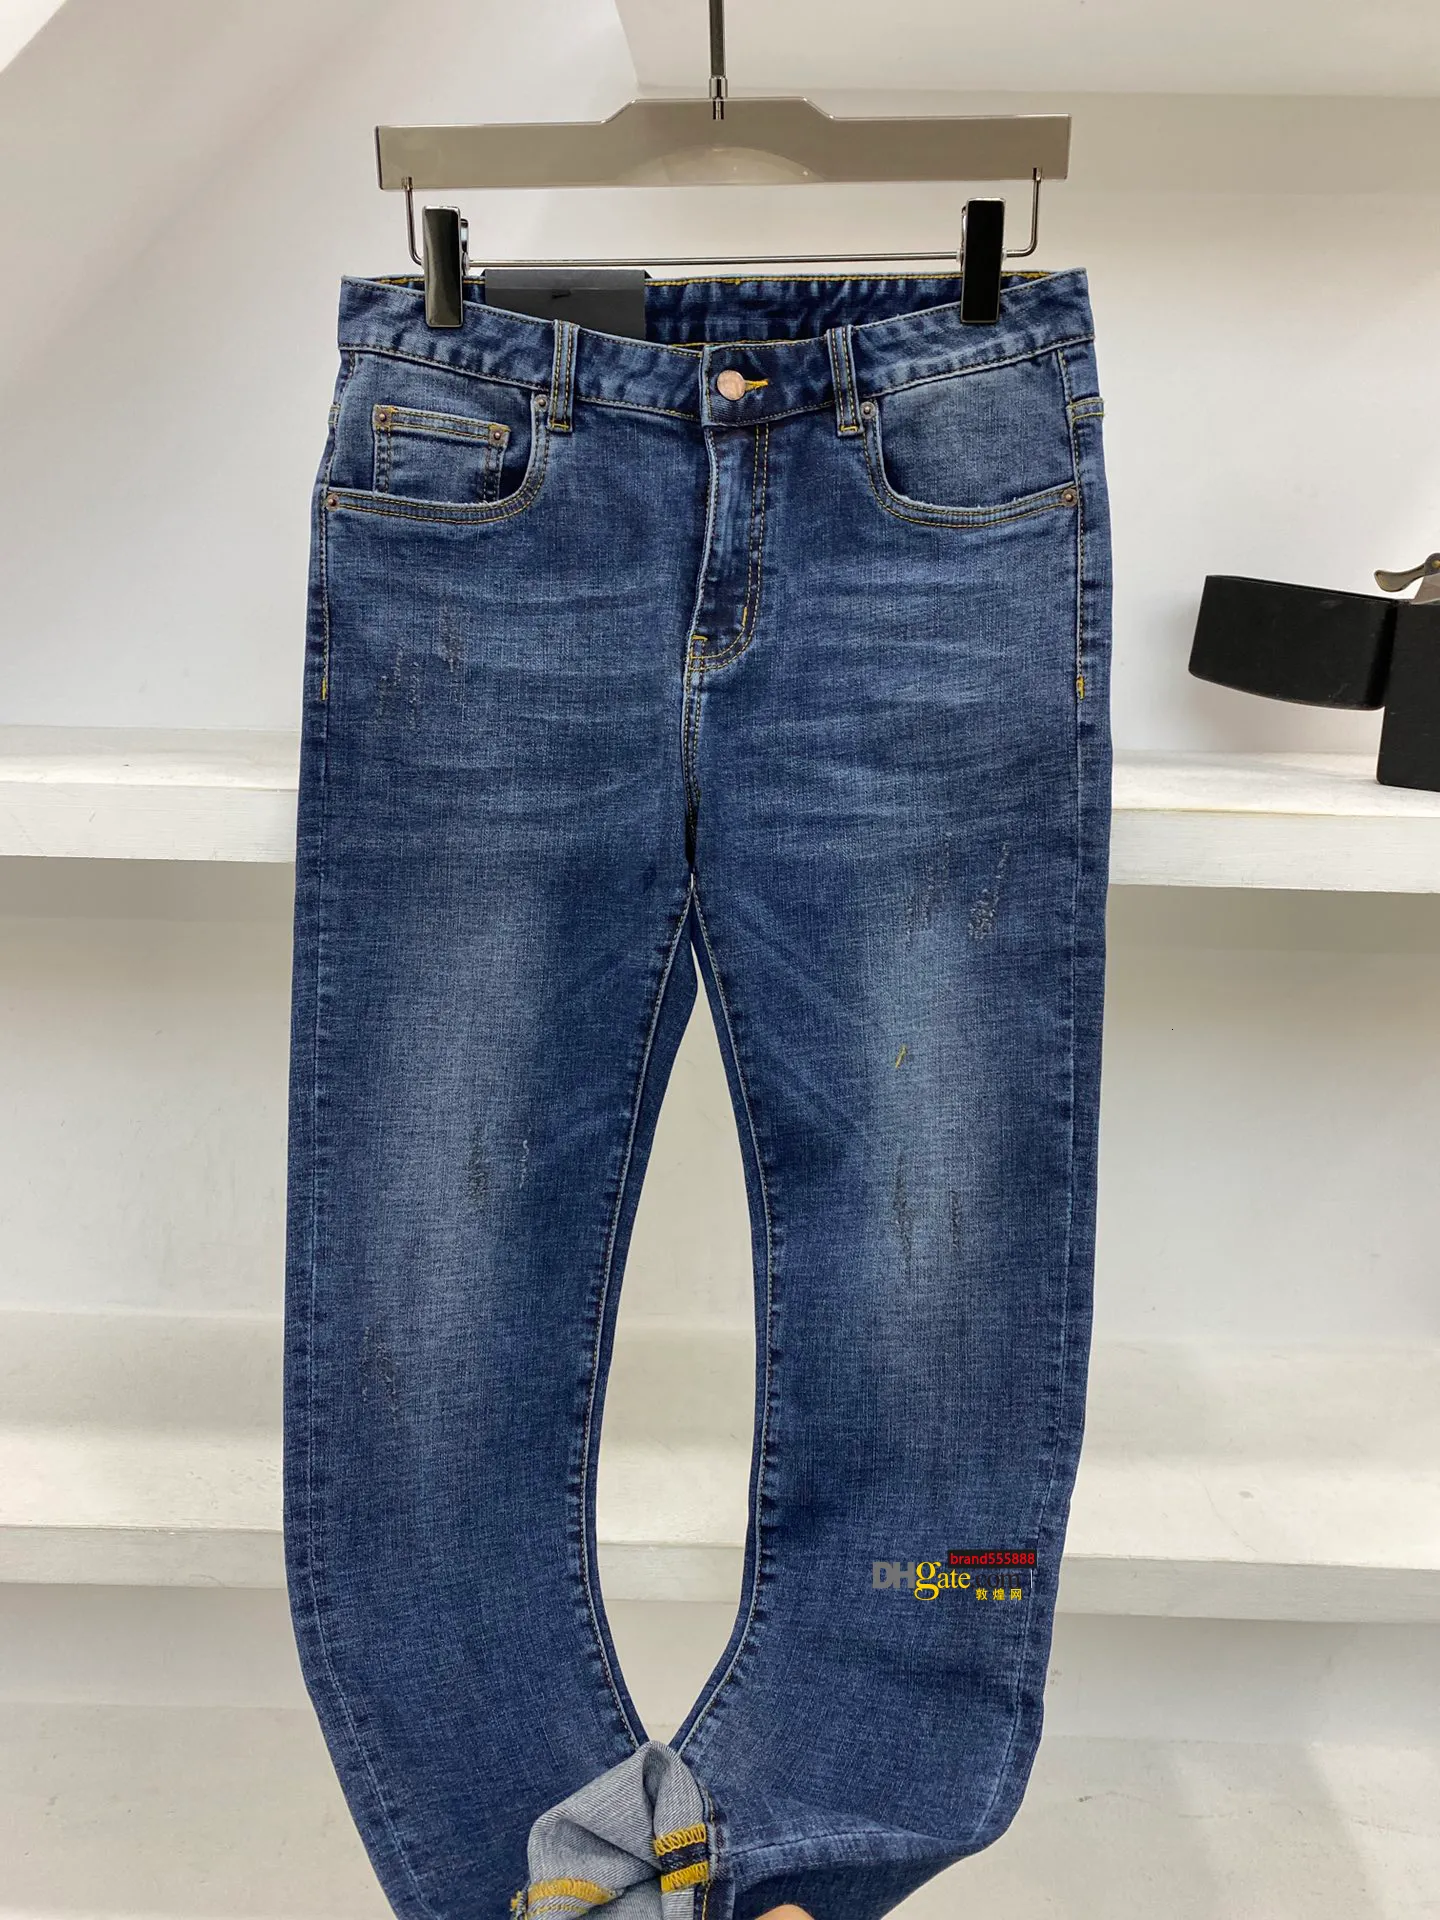 New designer jeans for 2021 fall and winter are stylish comfortable slightly elastic slim-fit luxurious high-quality mens handsome jeans